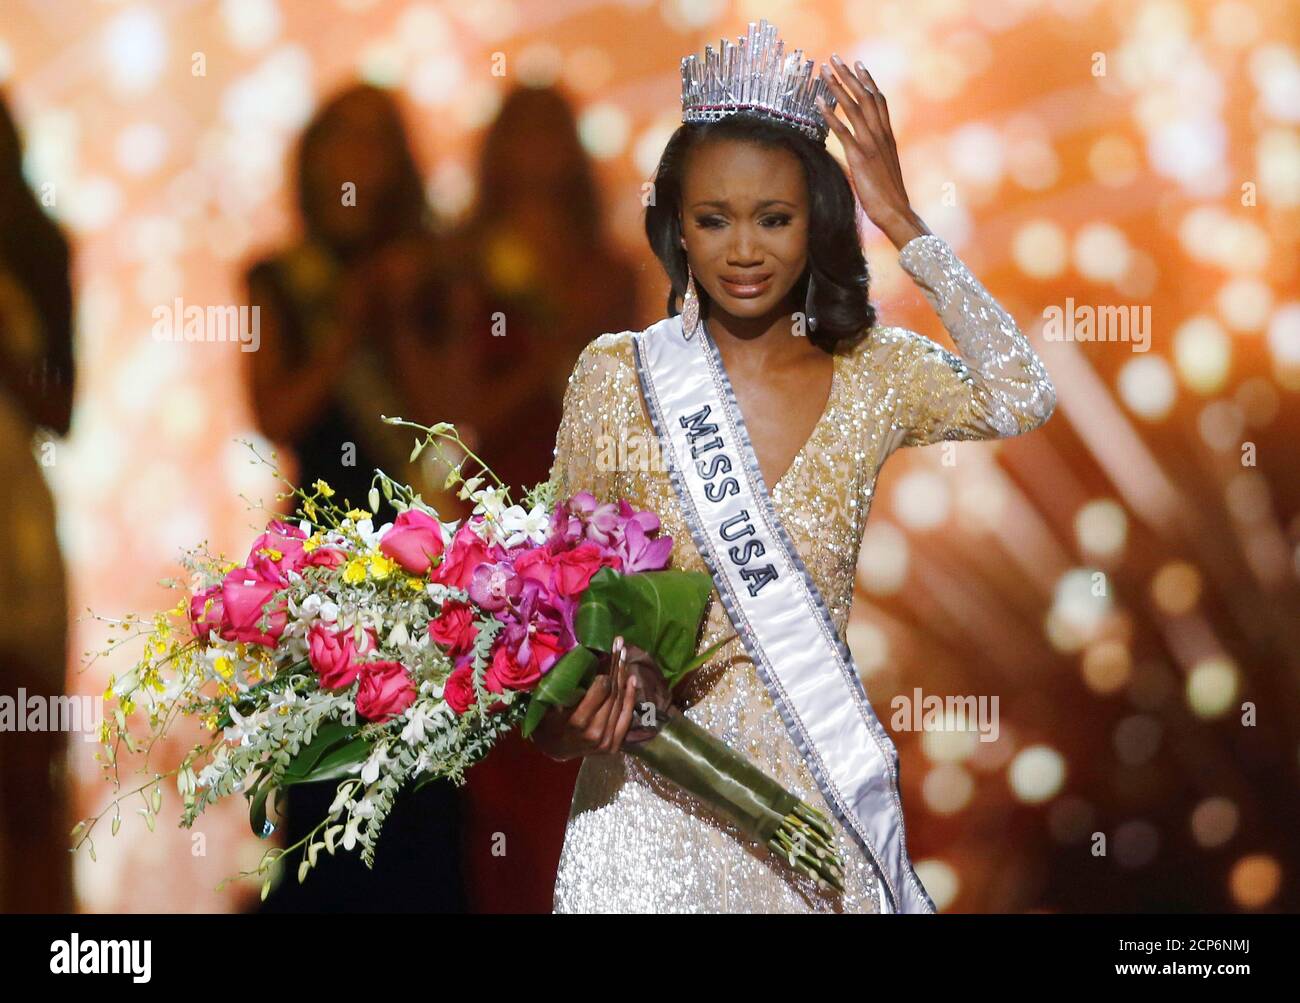 Deshauna Barber of the District of Columbia reacts after being crowned Miss USA during the 2016 Miss USA pageant at the T-Mobile Arena in Las Vegas, Nevada, U.S., June 5, 2016. REUTERS/Steve Marcus Stock Photo